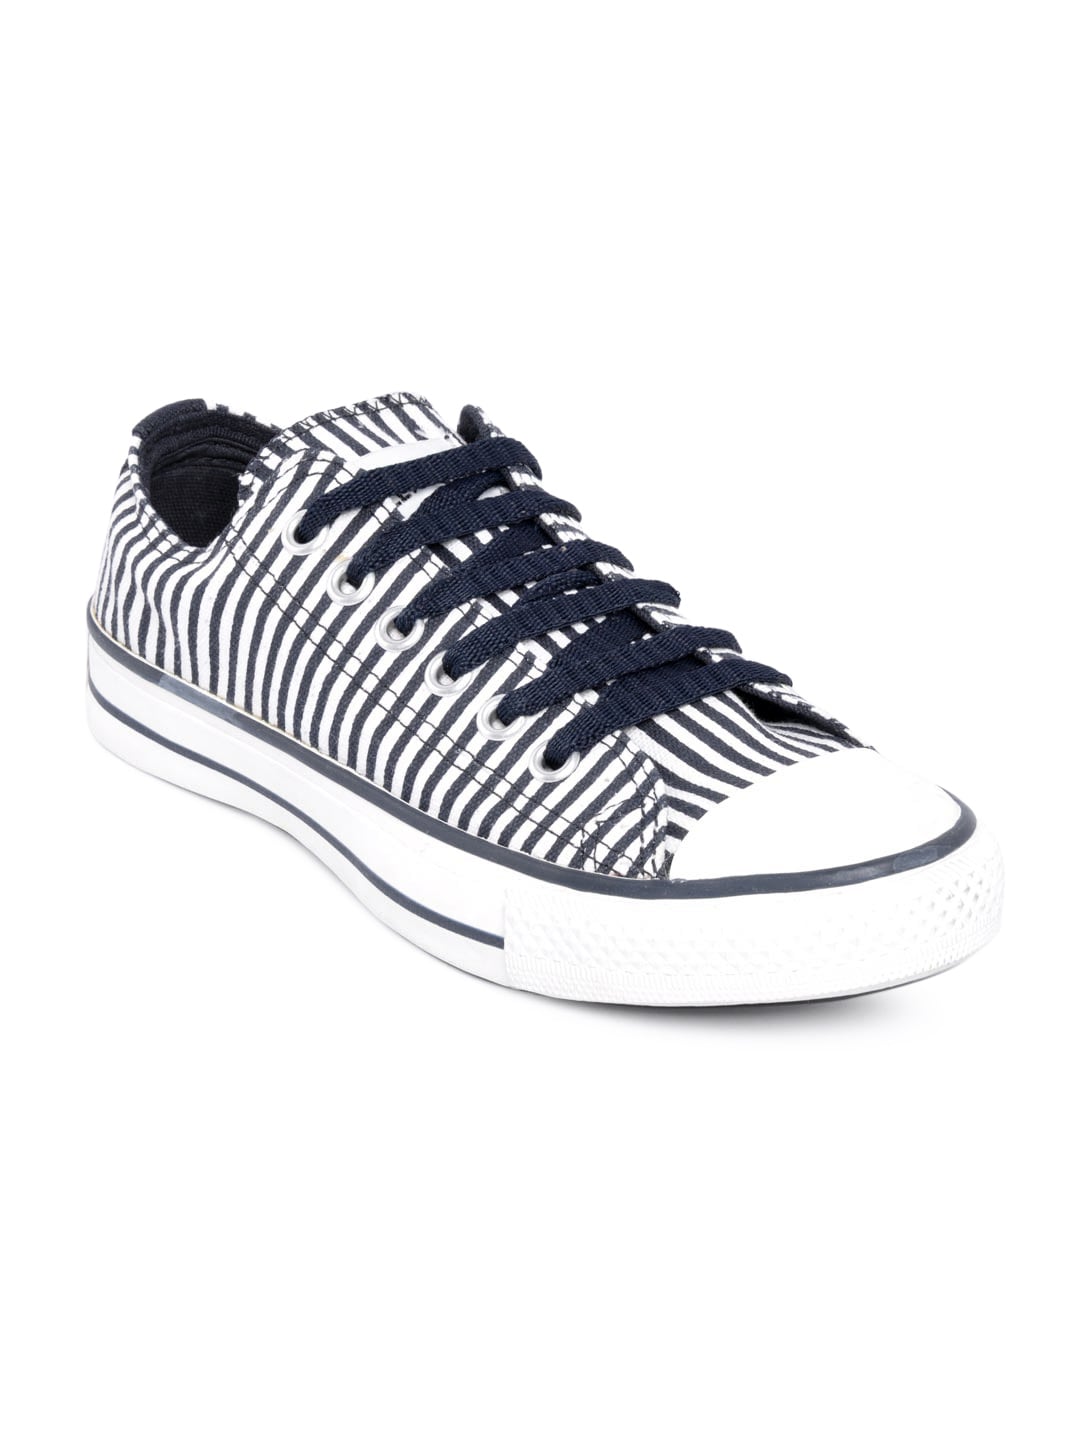 Converse Unisex Navy Blue White Casual Shoes